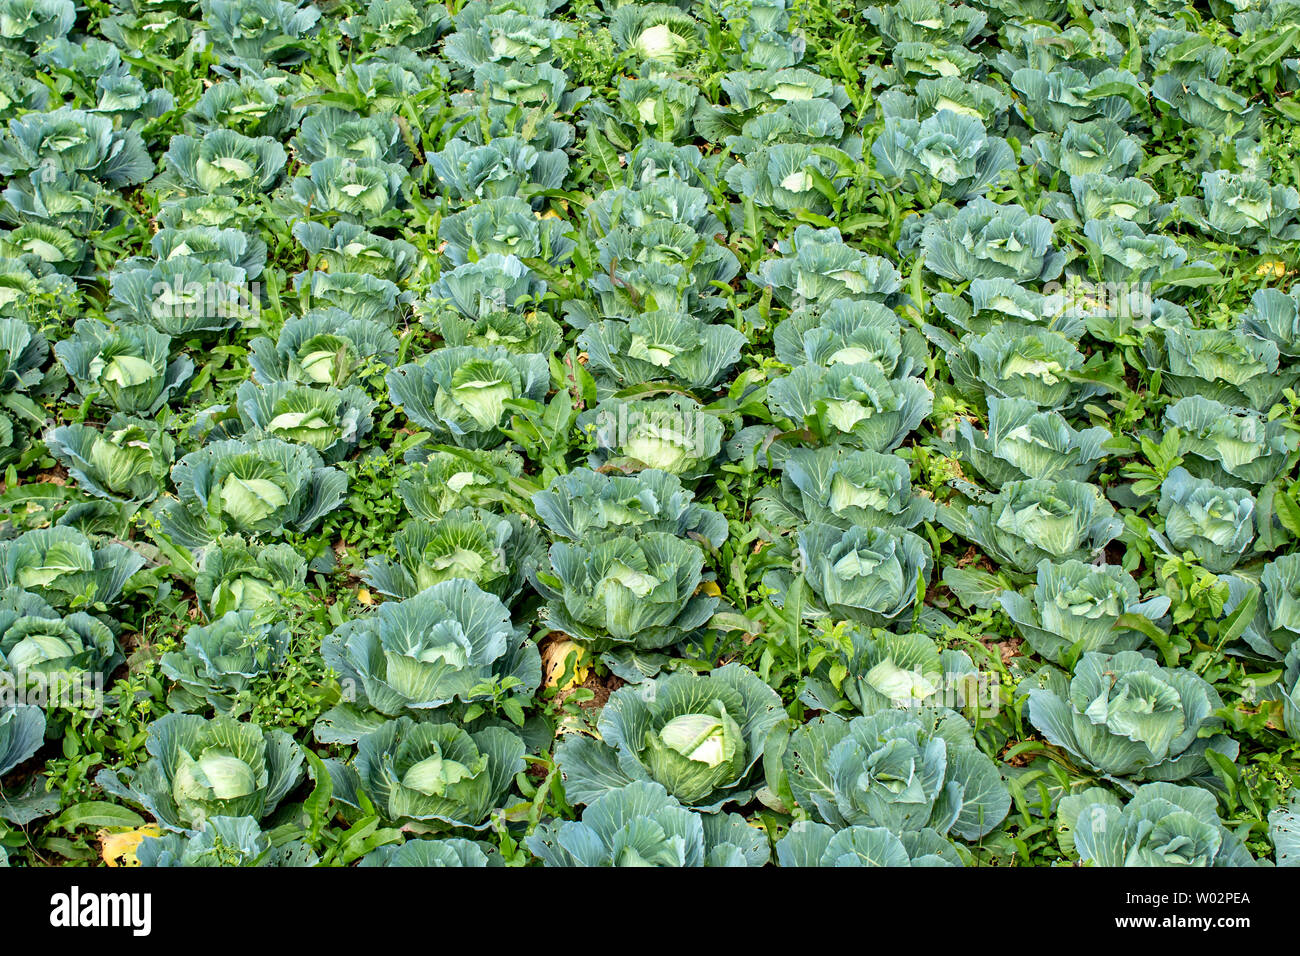 Cabbage grown on the farm land. Stock Photo